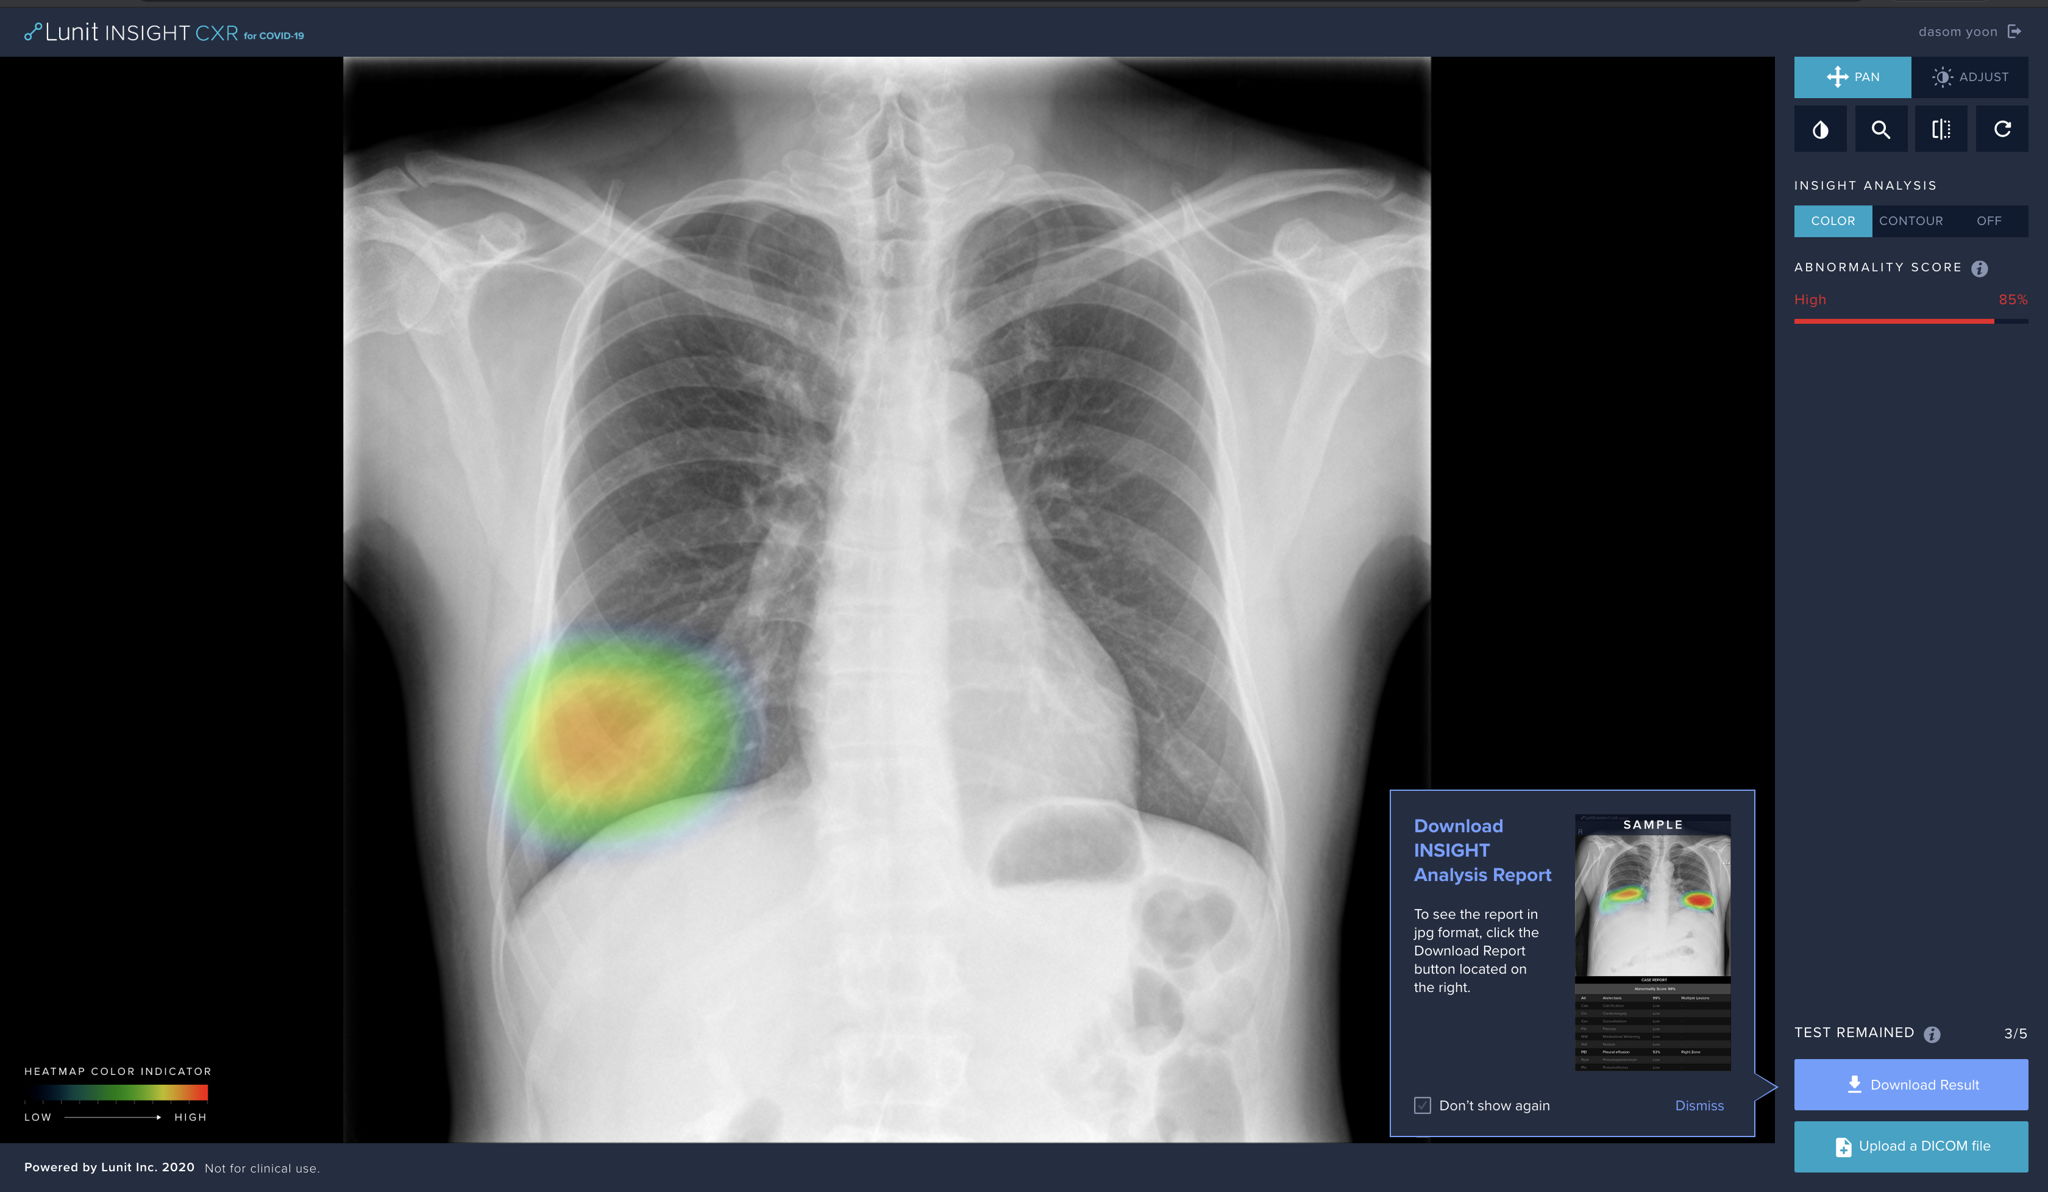 A screenshot of Lunit INSIGHT CXR for COVID-19 analyzing a lung consolidation case. In light of the outbreak, the service is currently provided online for free.